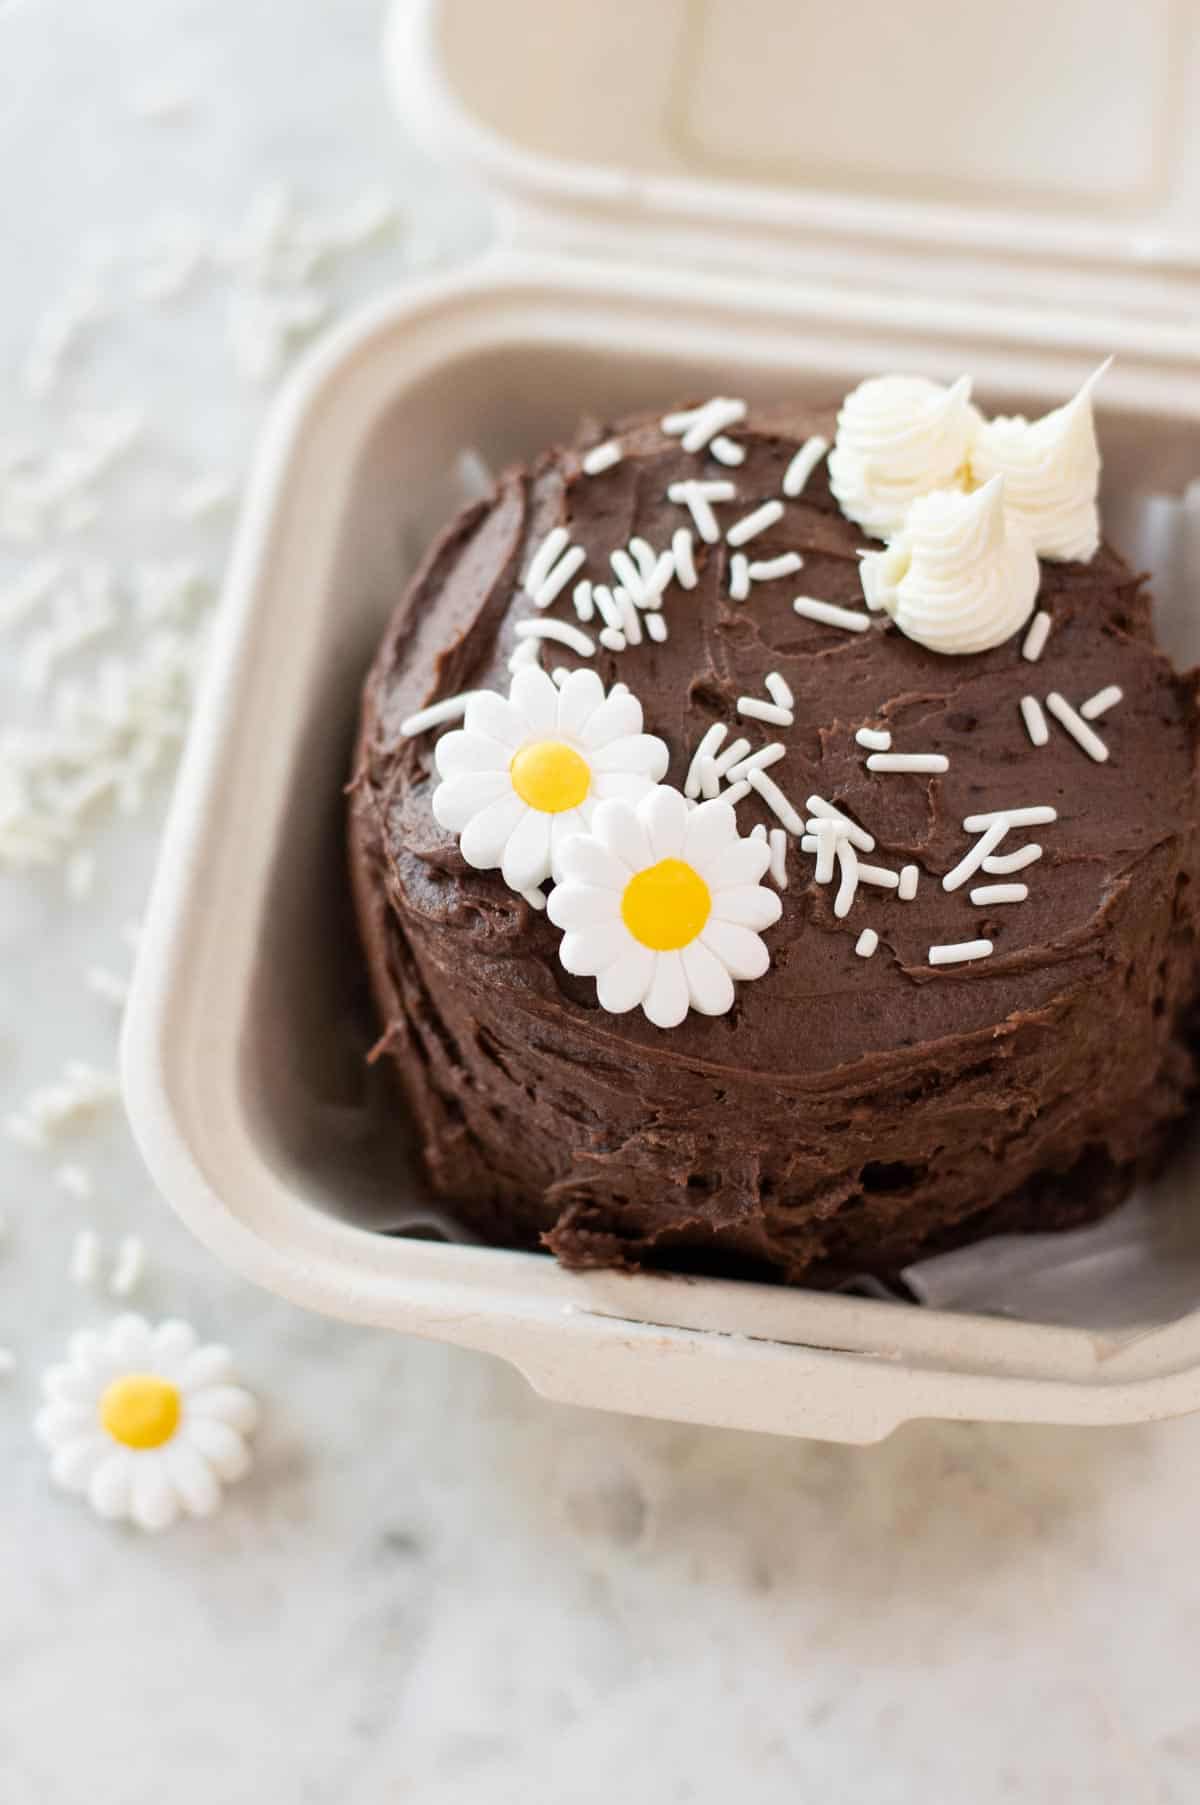 Lunchbox Cakes  All you need to know to make this adorable cakes